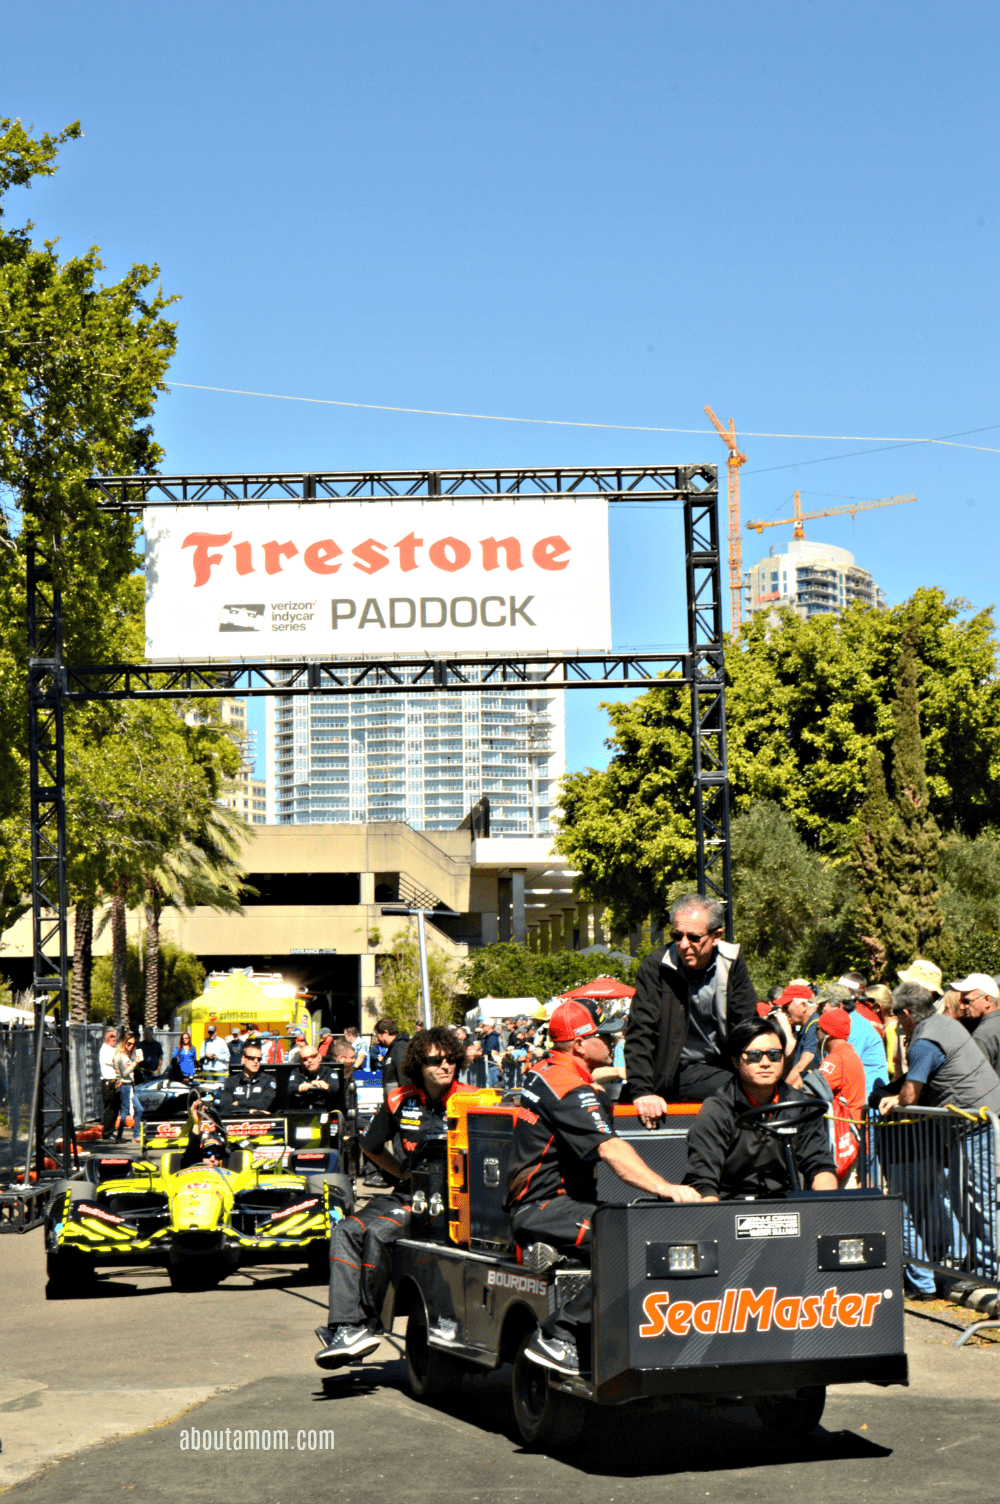 The Firestone Grand Prix of St. Petersburg is 3-days of fast cars and world-class drivers. It's also a whole lot of family fun! Here are some tips for attending the Firestone Grand Prix of St. Petersburg with kids.